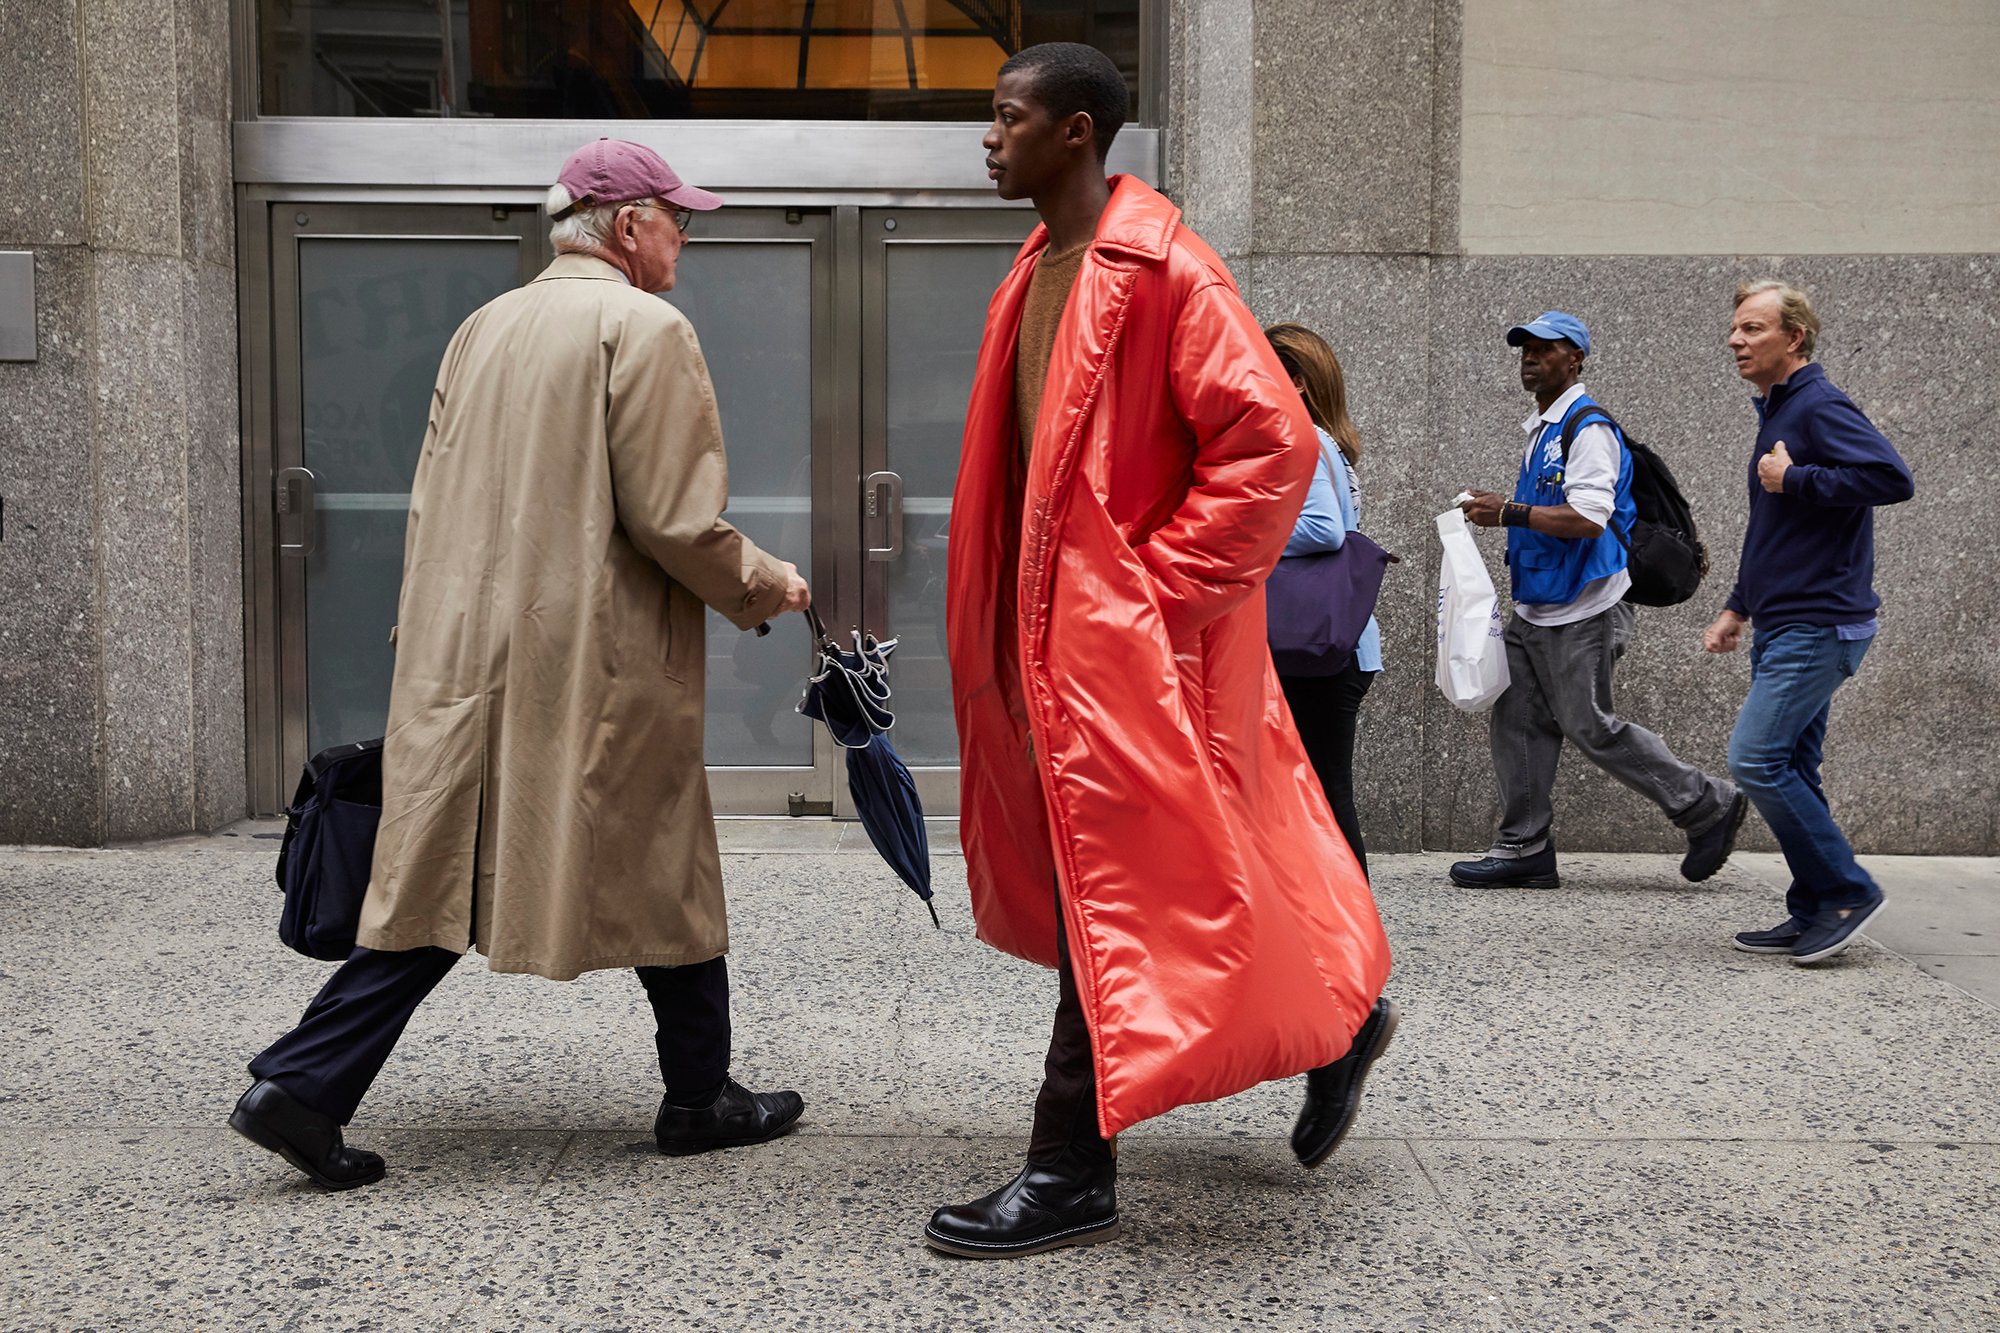 A young man walking with a shiny, smooth, puffy, plasticky scarlet trenchcoat. He walks forward while an older man in a typical beige cotton trenchcoat steps aside for him, shifting the weight of his closed umbrella away.